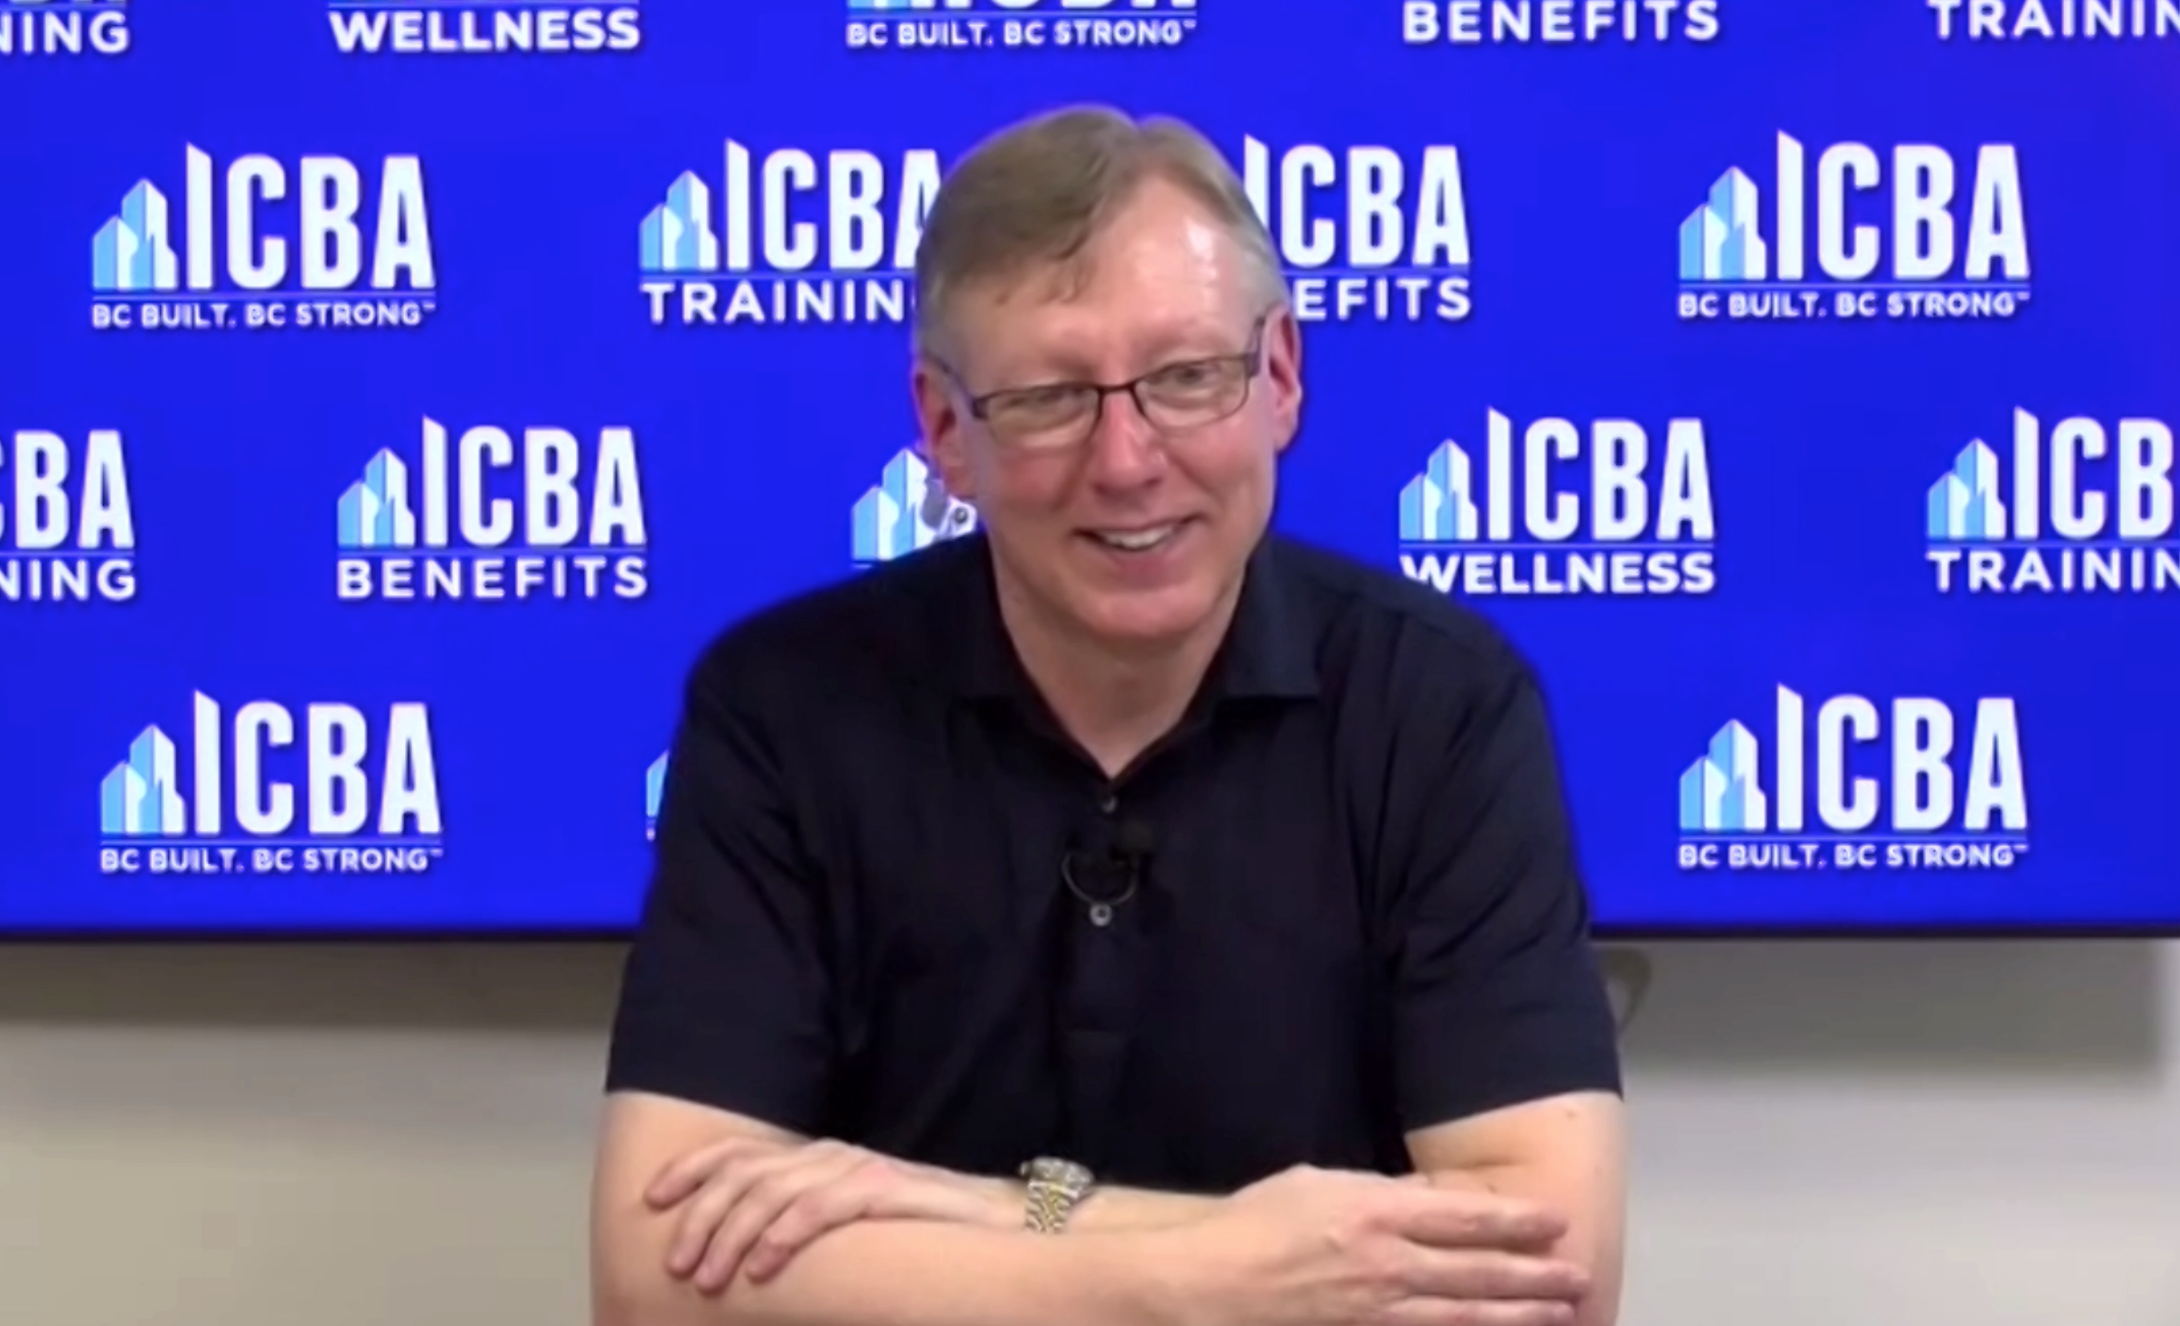 Best of: ICBA unveils mental health support program; ICBA president on his personal story